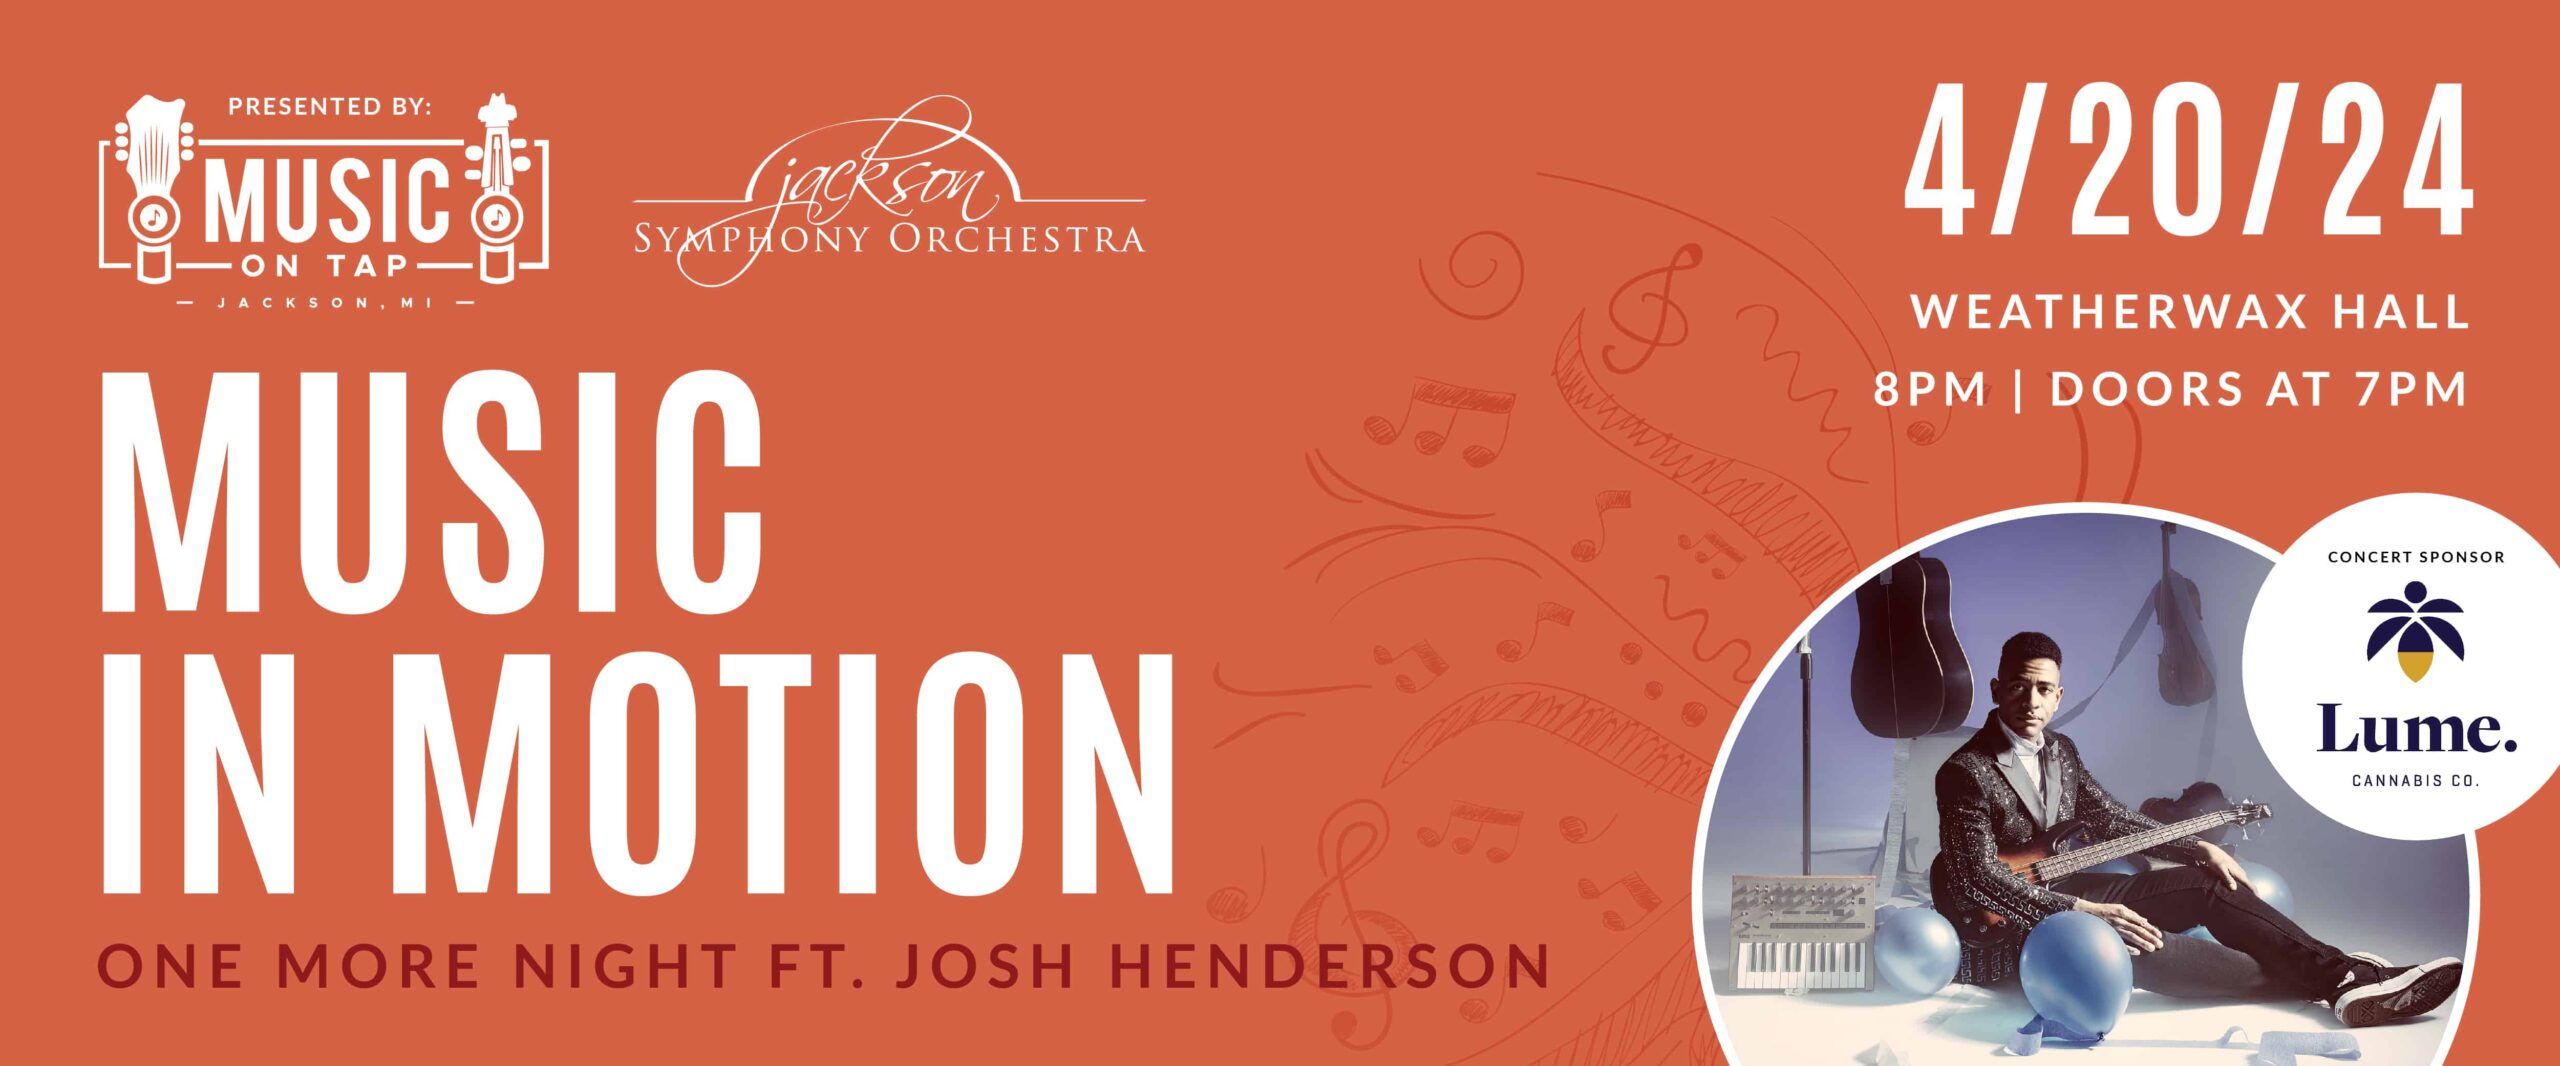 Music in Motion with One More Night ft. Josh Henderson Takes Center Stage at Weatherwax Hall